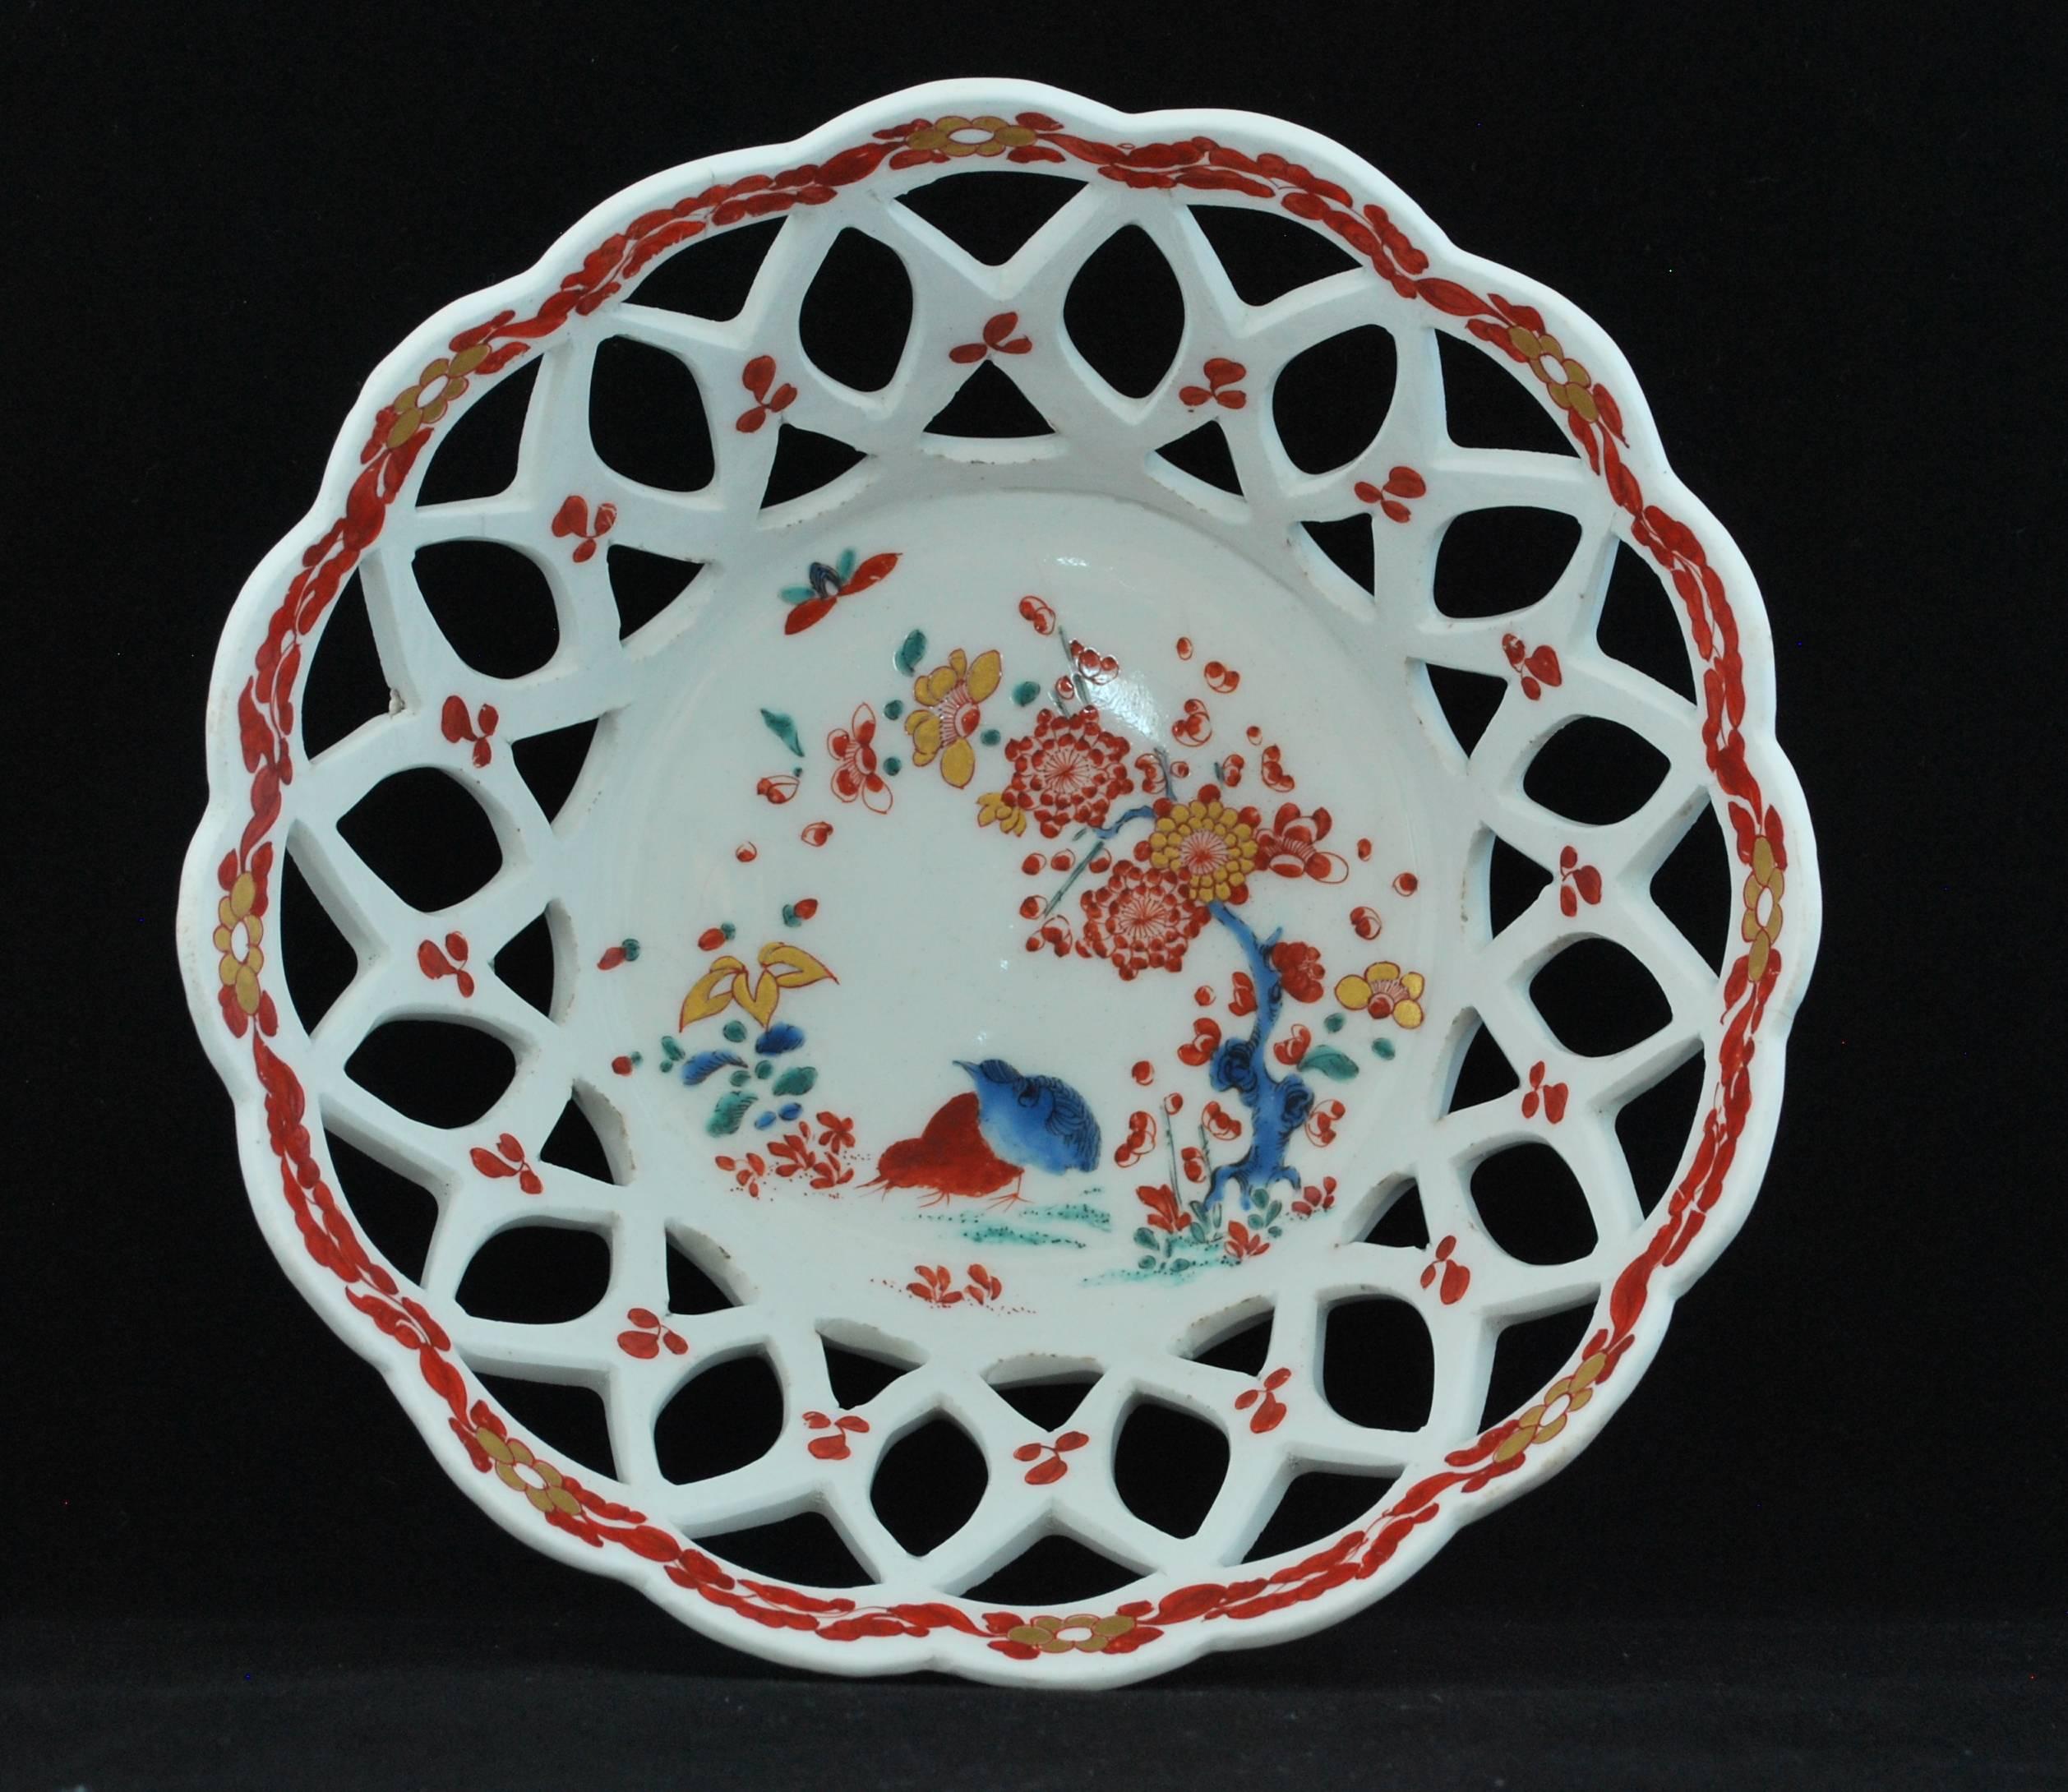 A ‘spectacle basket’, probably for oranges, with Kakiemon decoration to the interior, featuring the Two Quail pattern.

Provenance: Taylor Collection